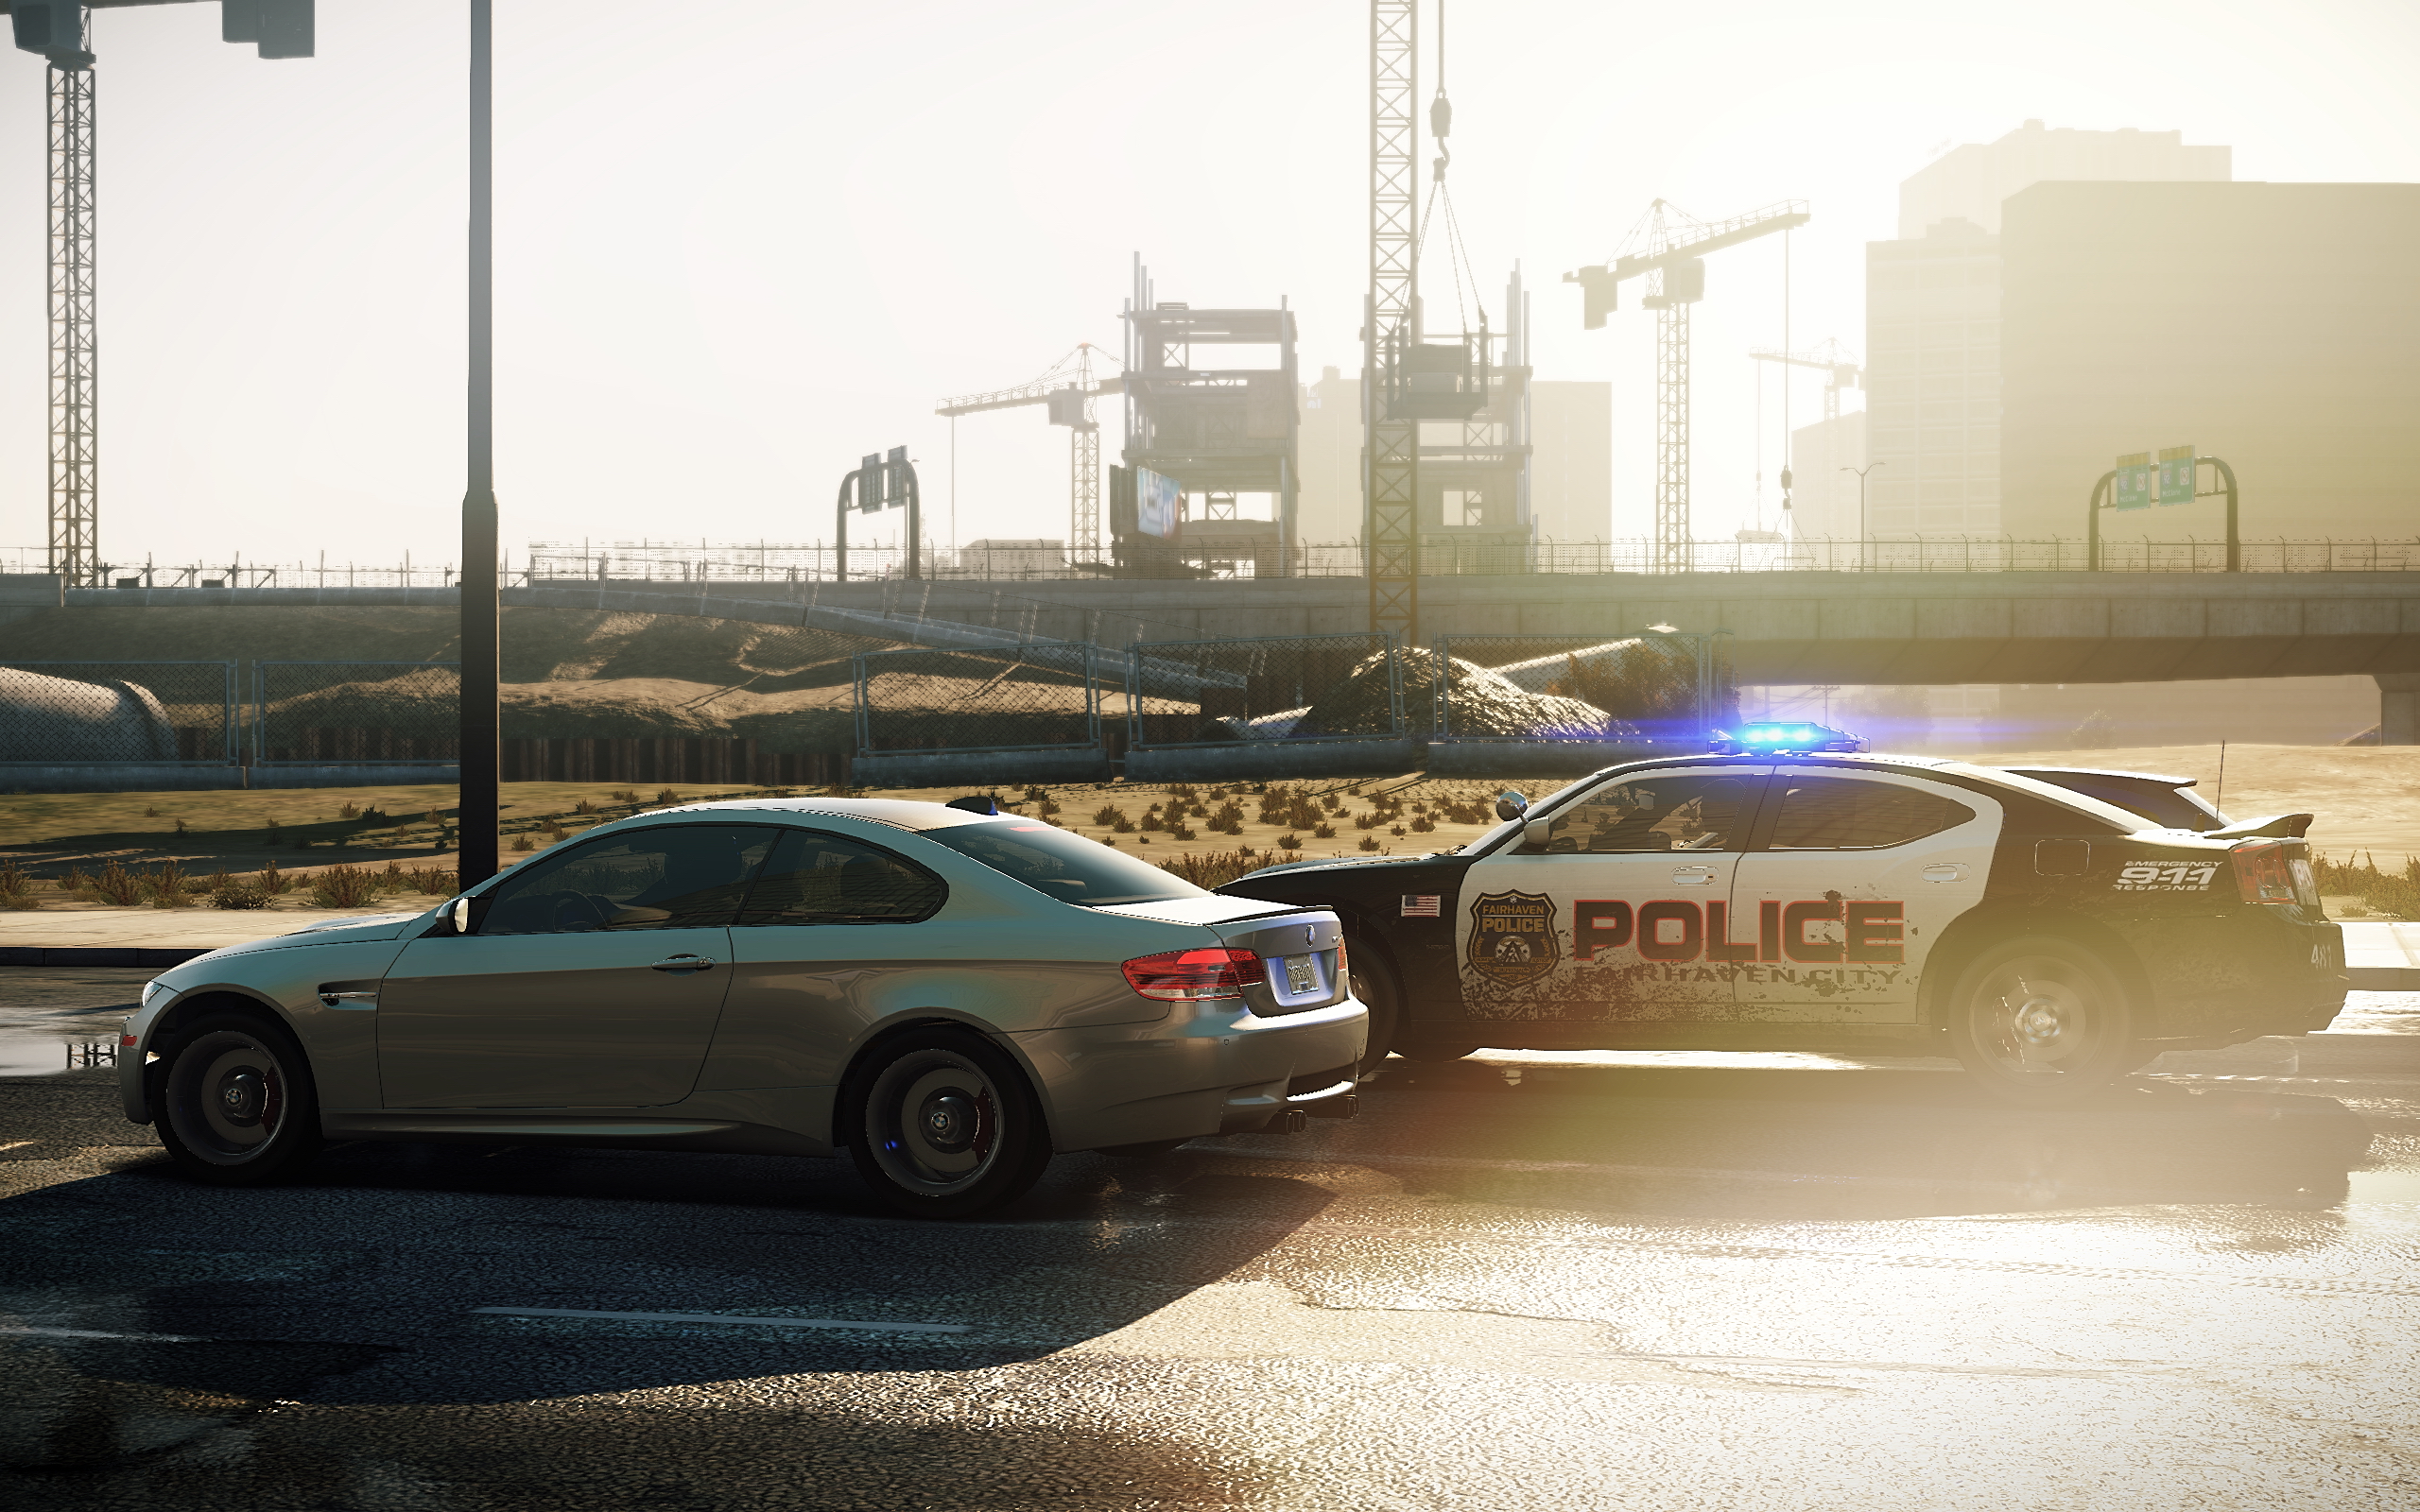 need for speed most wanted reviews